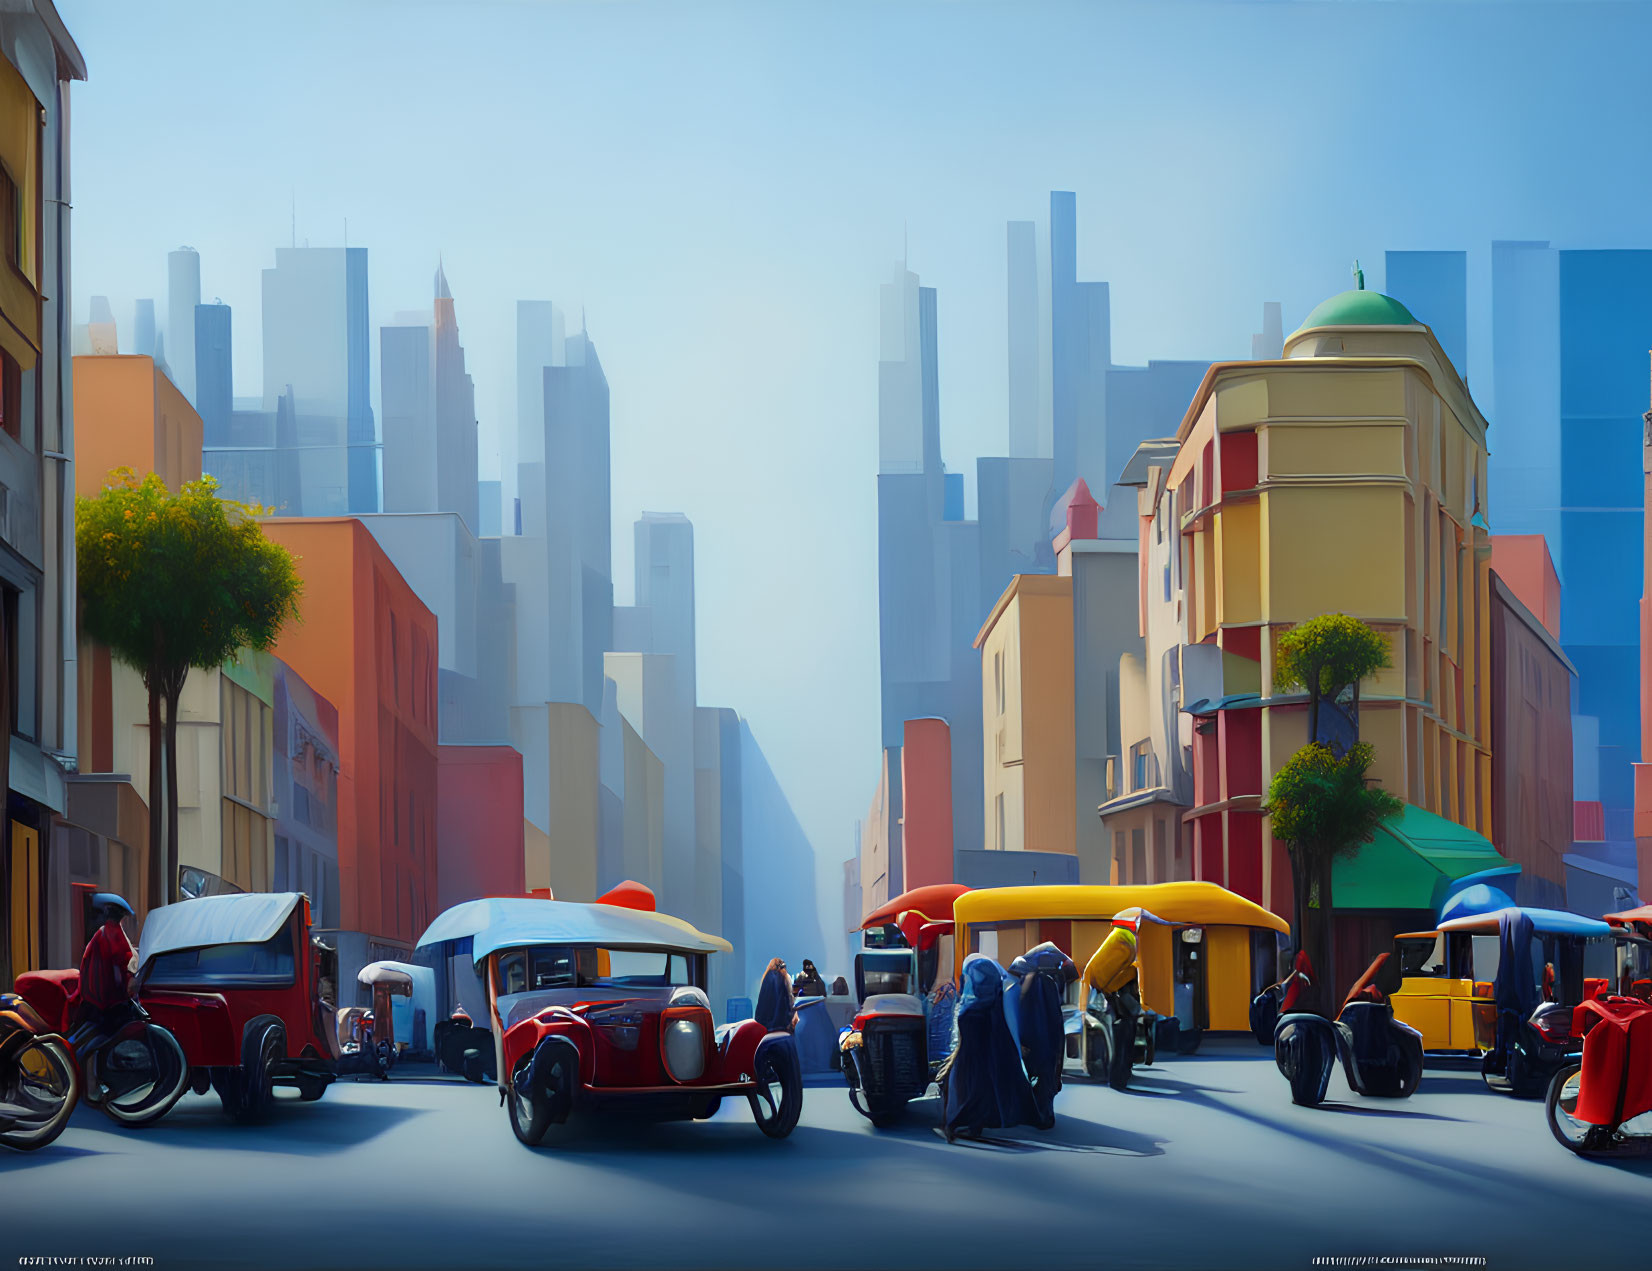 Stylized urban street scene with vintage cars and colorful buildings